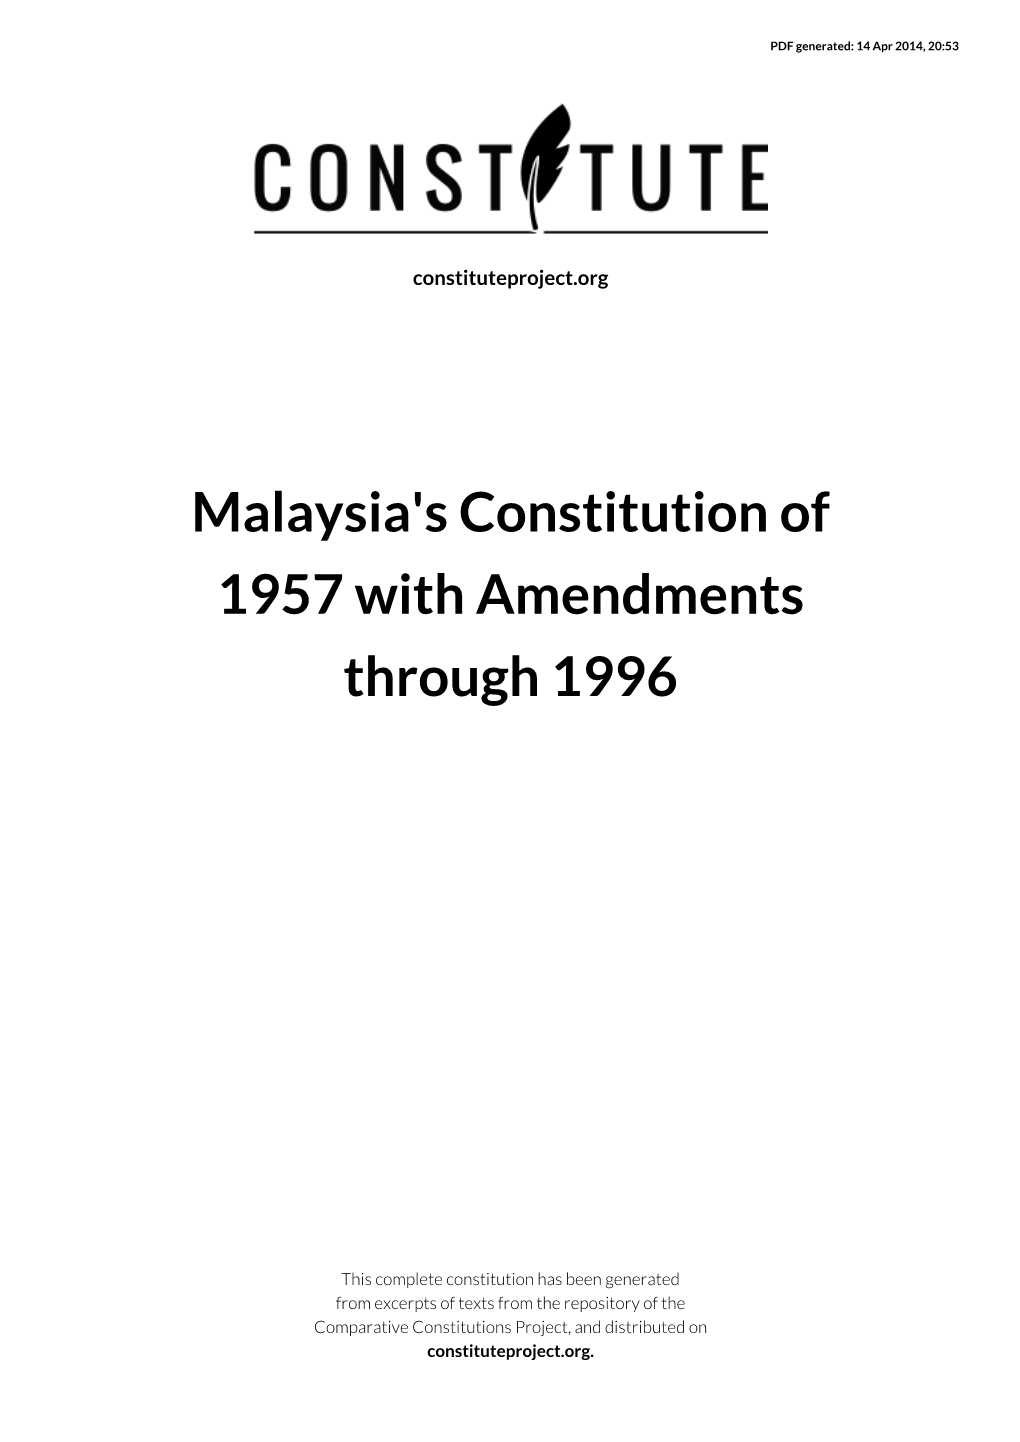 Malaysia's Constitution of 1957 with Amendments Through 1996